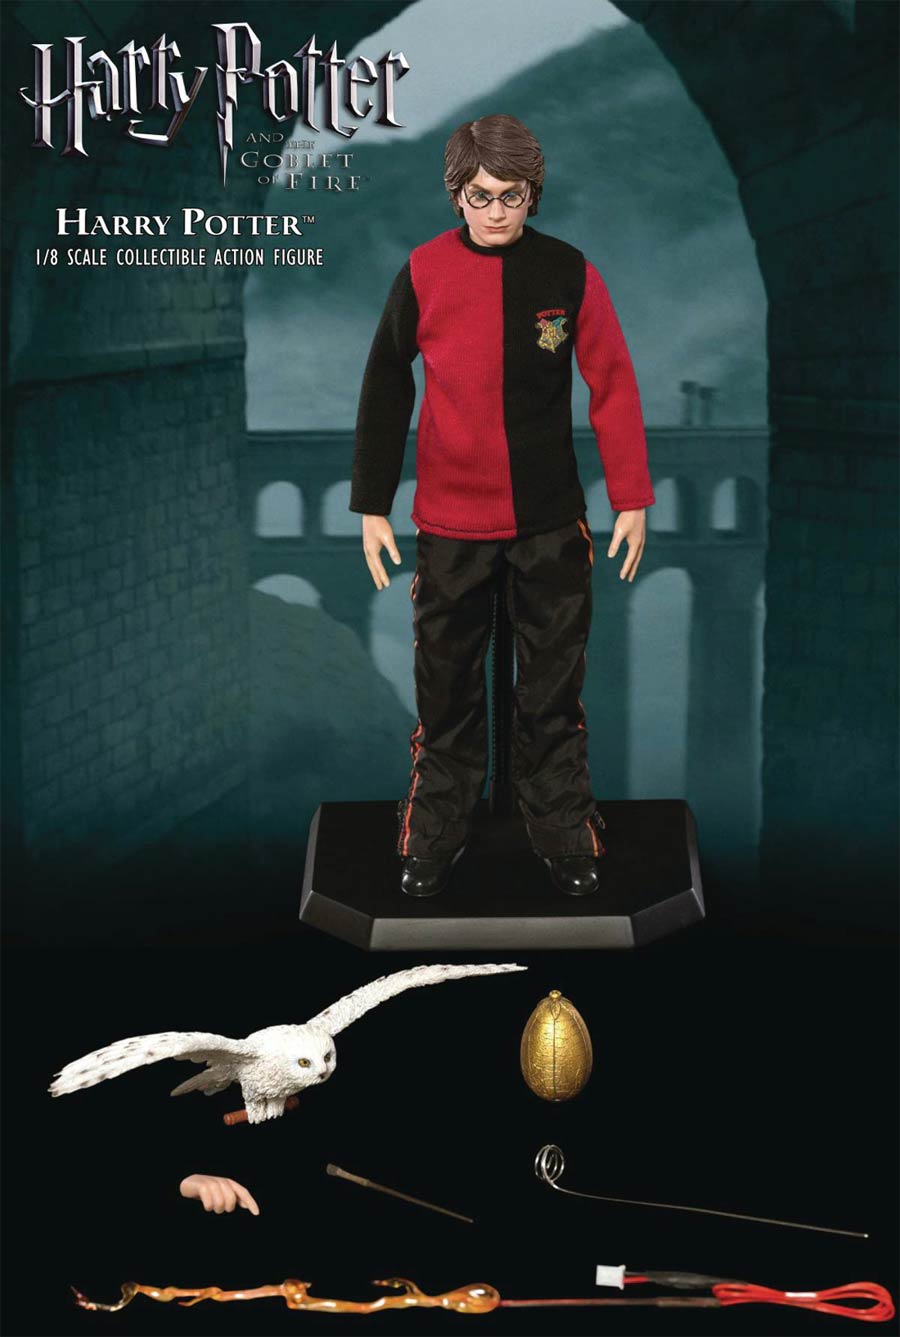 Harry Potter And The Goblet Of Fire Harry Potter Triwizard 1/8 Scale Action Figure Version C With Wand Flash